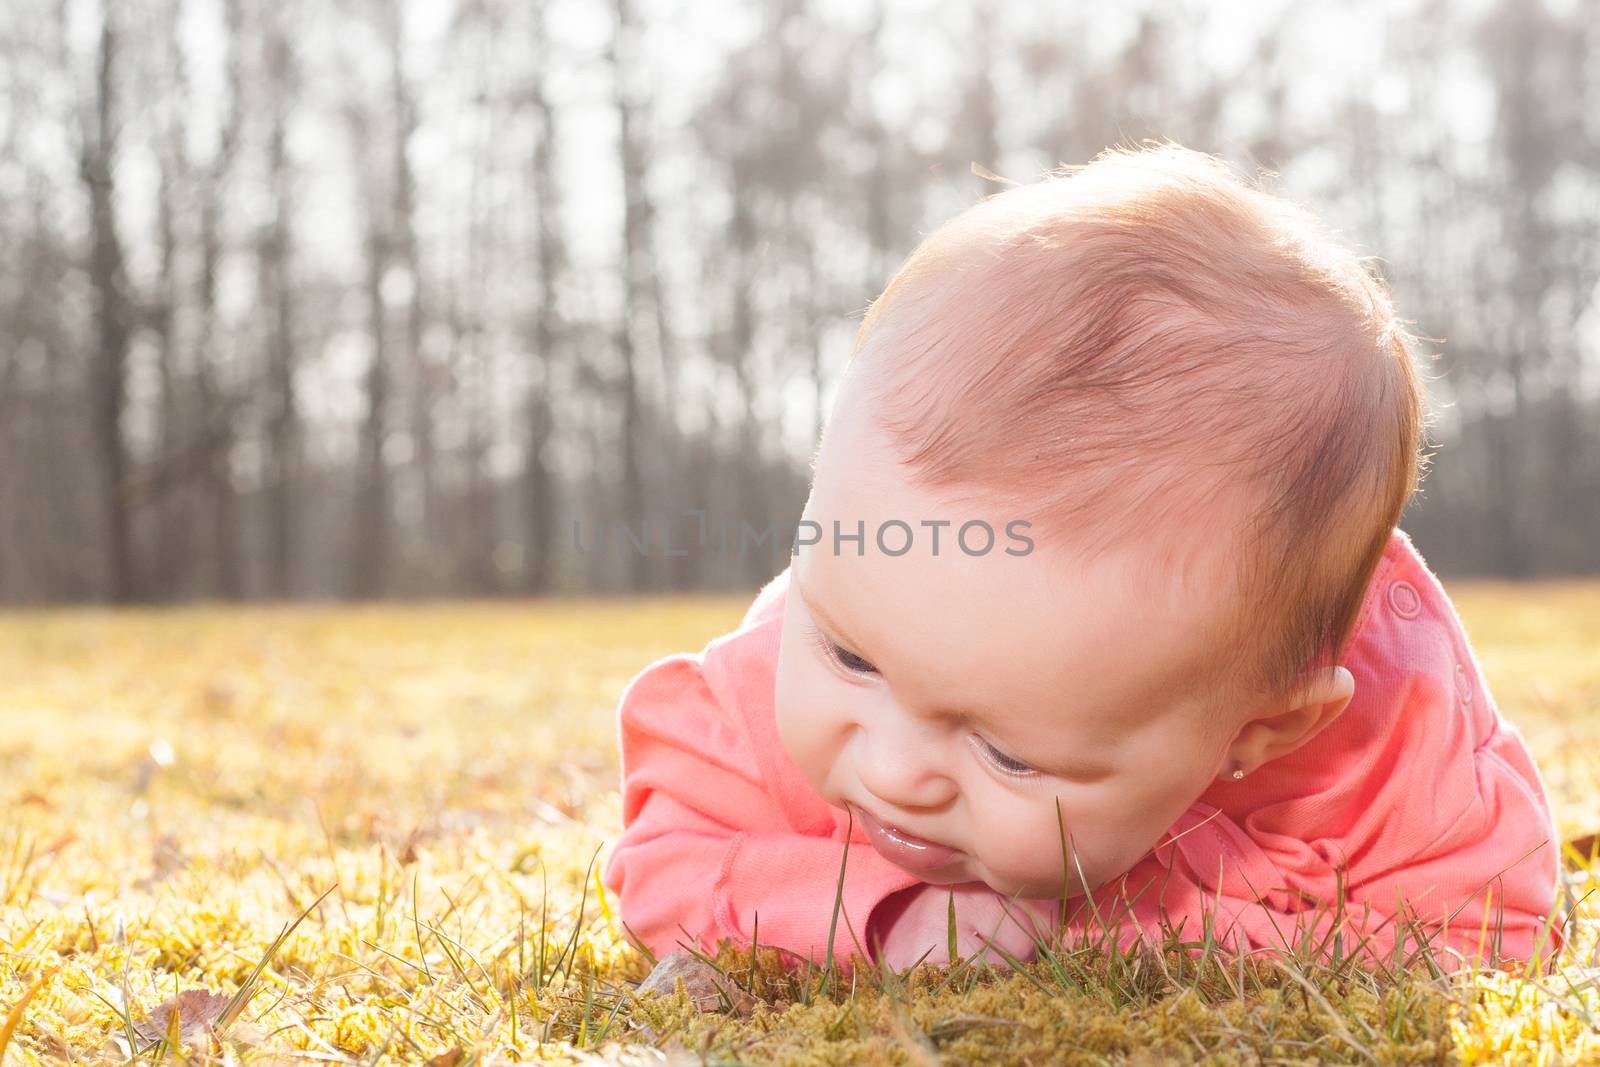 Little baby on the grass in the sun